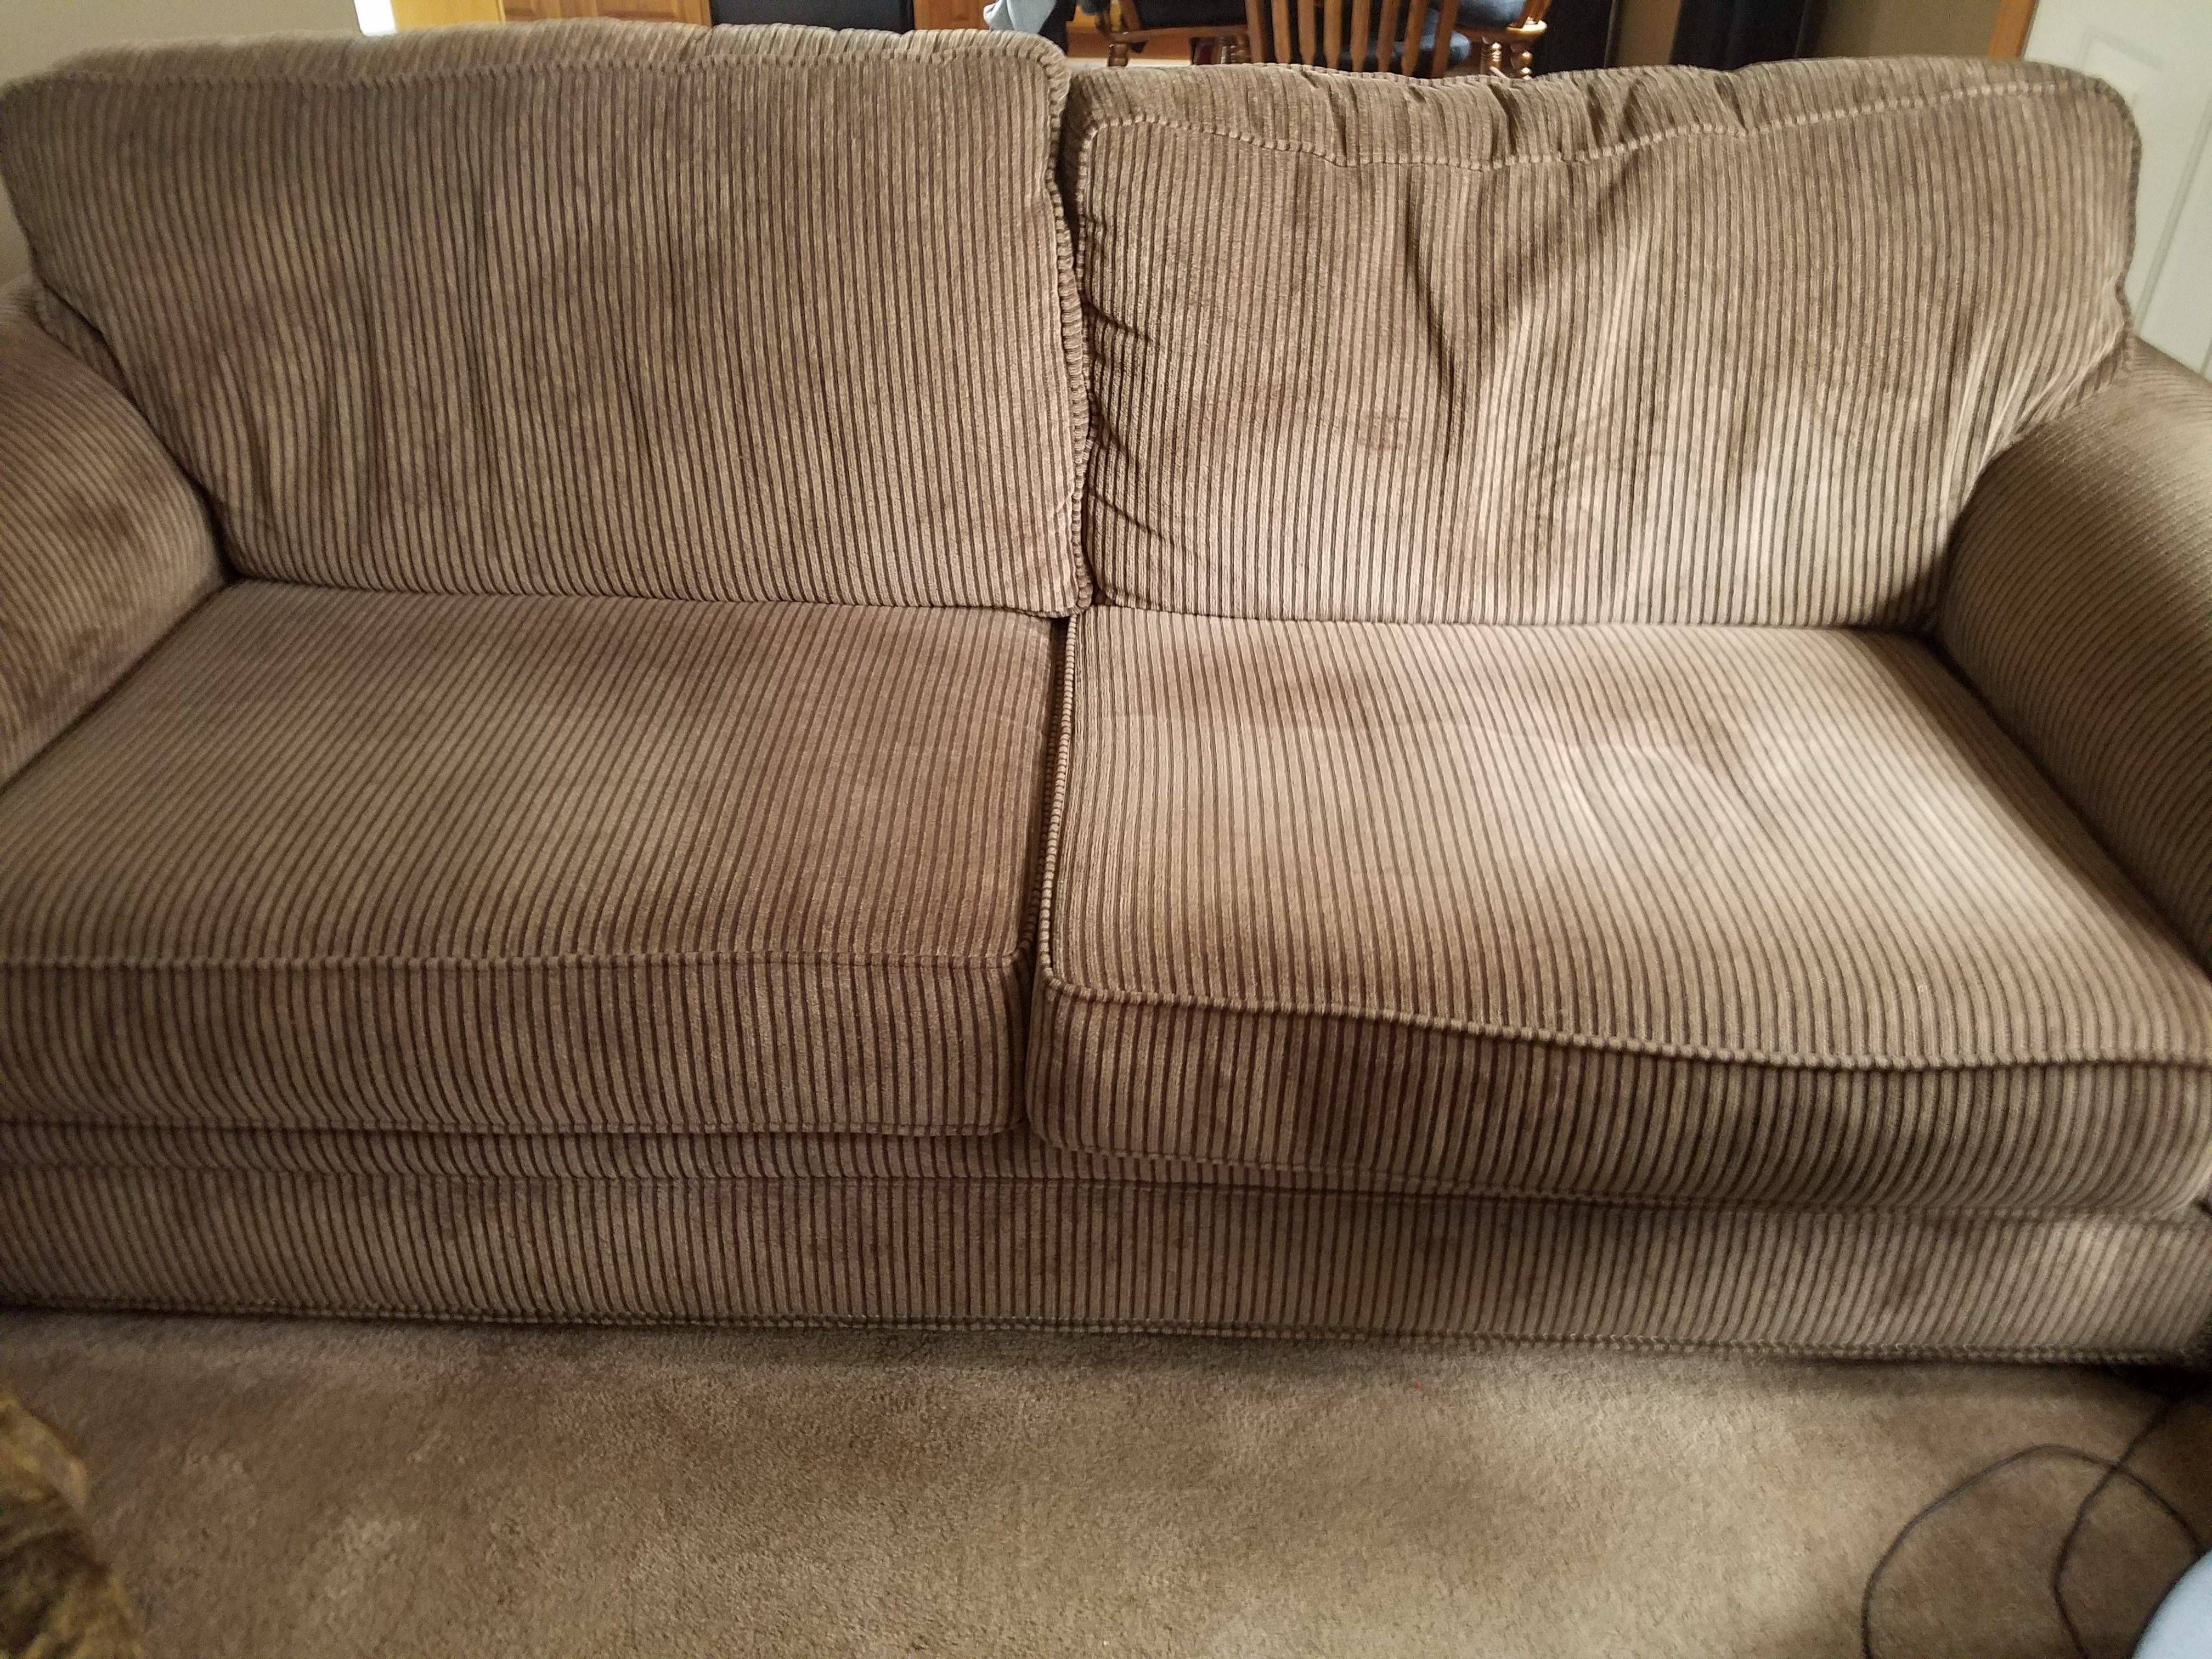 Top 129 Complaints And Reviews About Broyhill Regarding Broyhill Sectional Sofas (View 9 of 30)